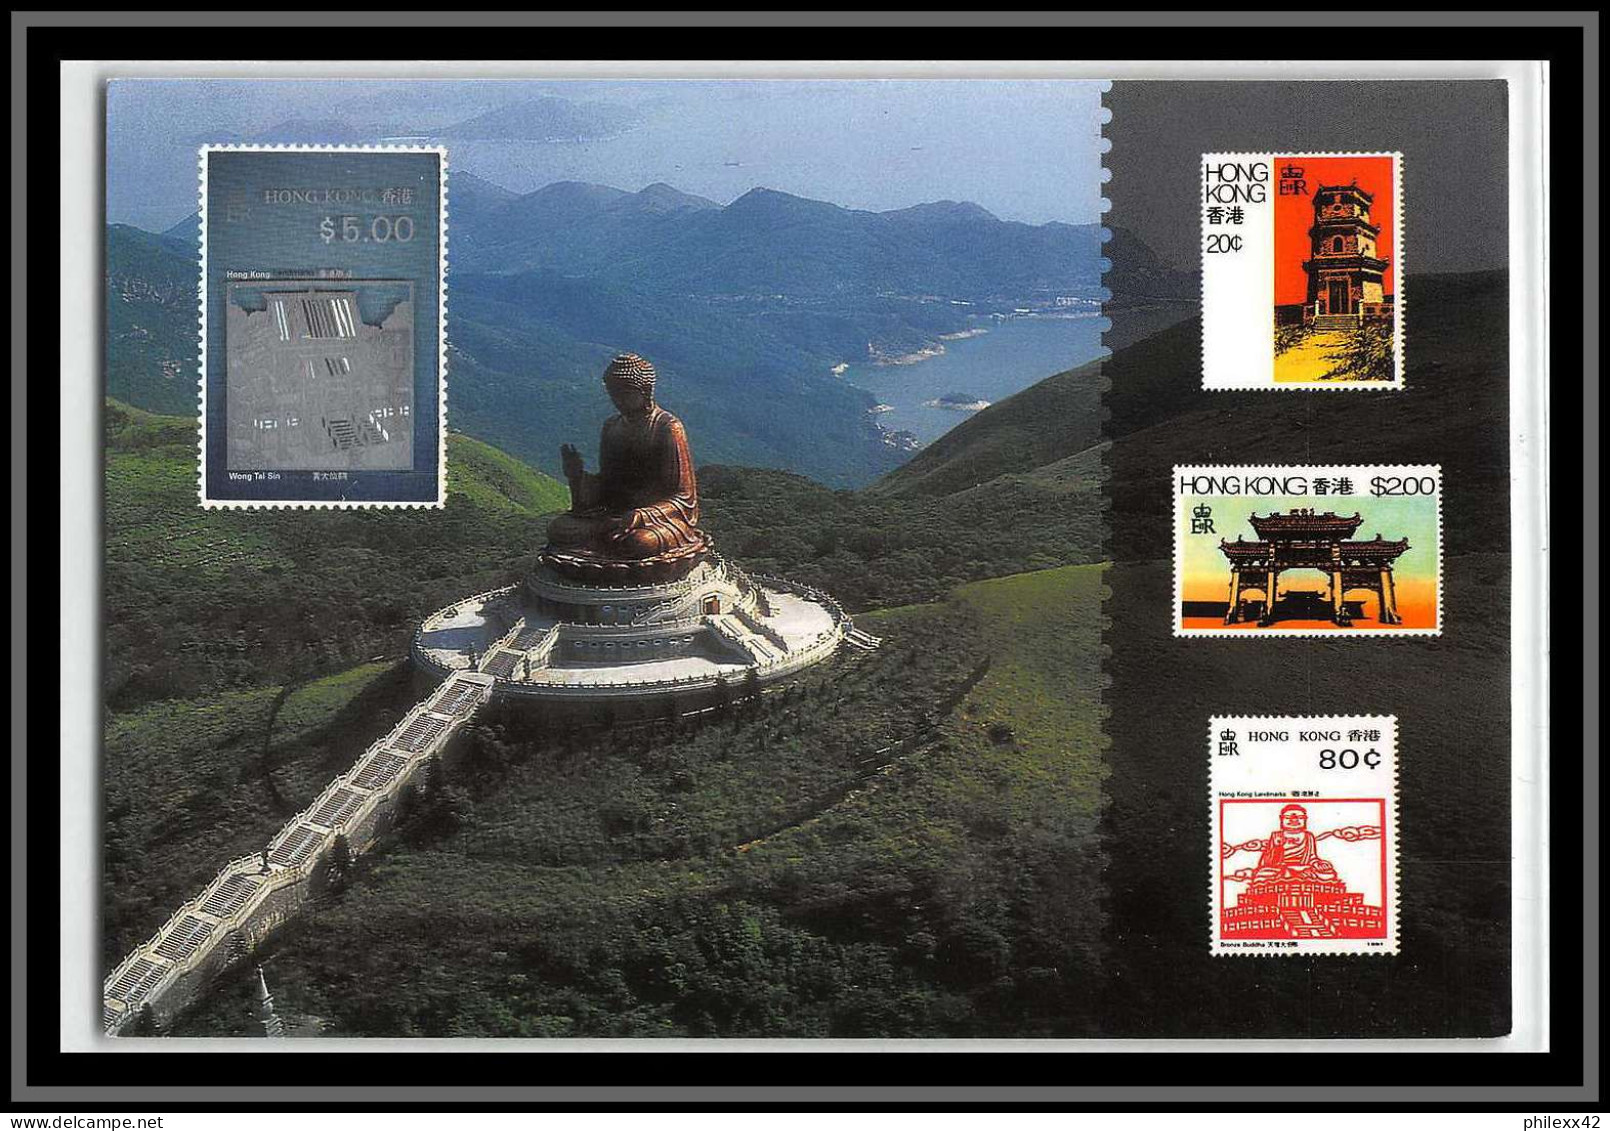 49166 Hong Kong 97 Stamp Exhibition 1997 By Air Mail Par Avion China Entier Carte Postal Postcard Stationery Silver - Entiers Postaux